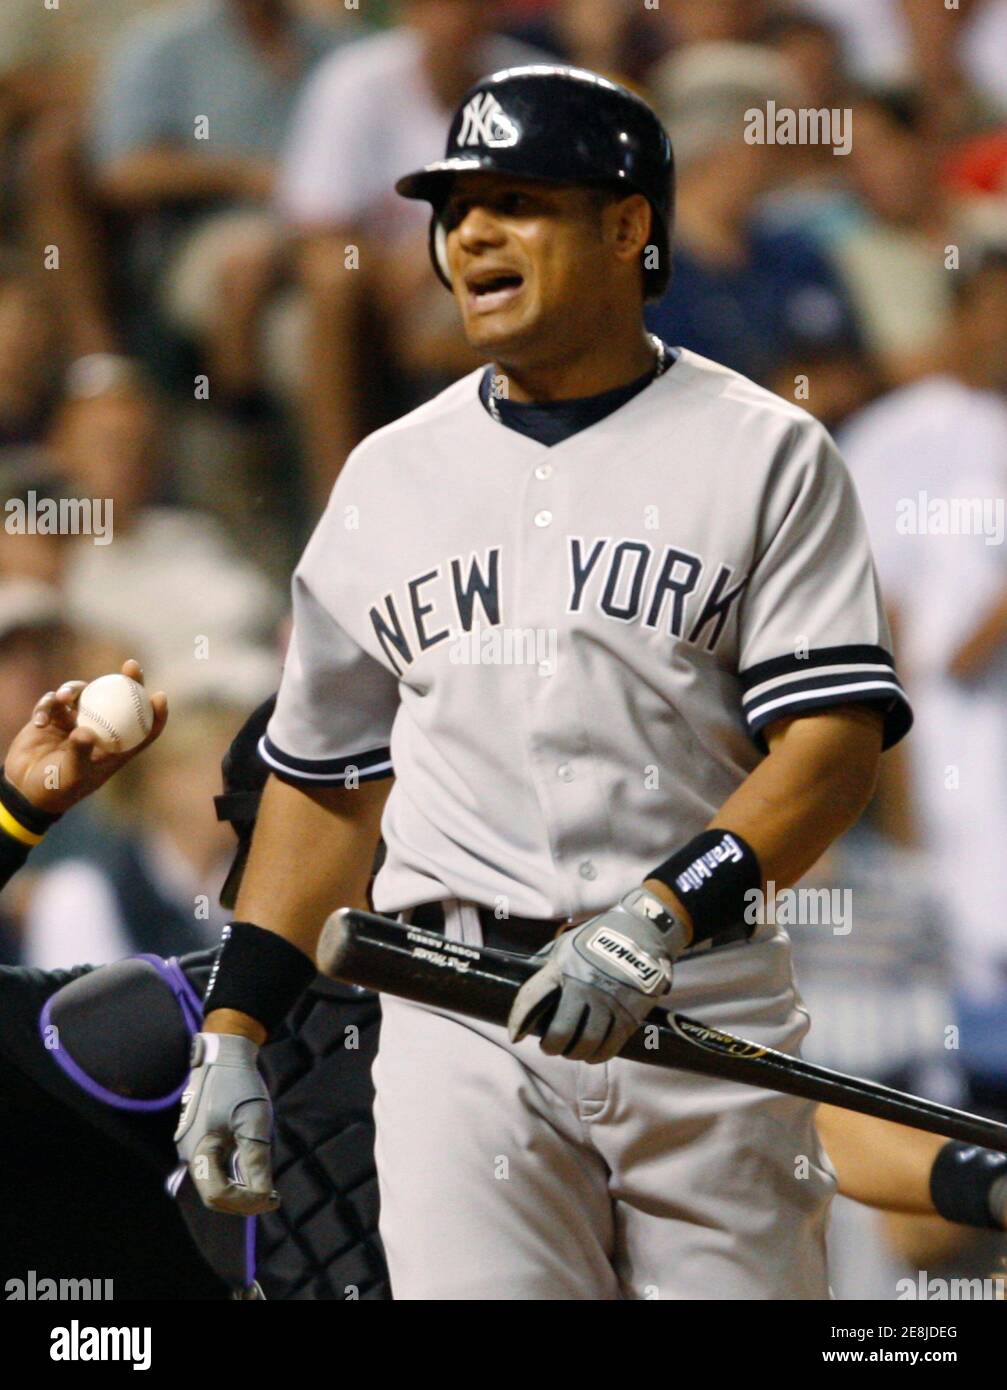 New York Yankees batter Bobby Abreu reacts after missing a pitch against the Colorado Rockies in the top of the ninth inning in their MLB interleague baseball game in Denver, Colorado June 20, 2007. REUTERS/Rick Wilking (UNITED STATES) Stock Photo